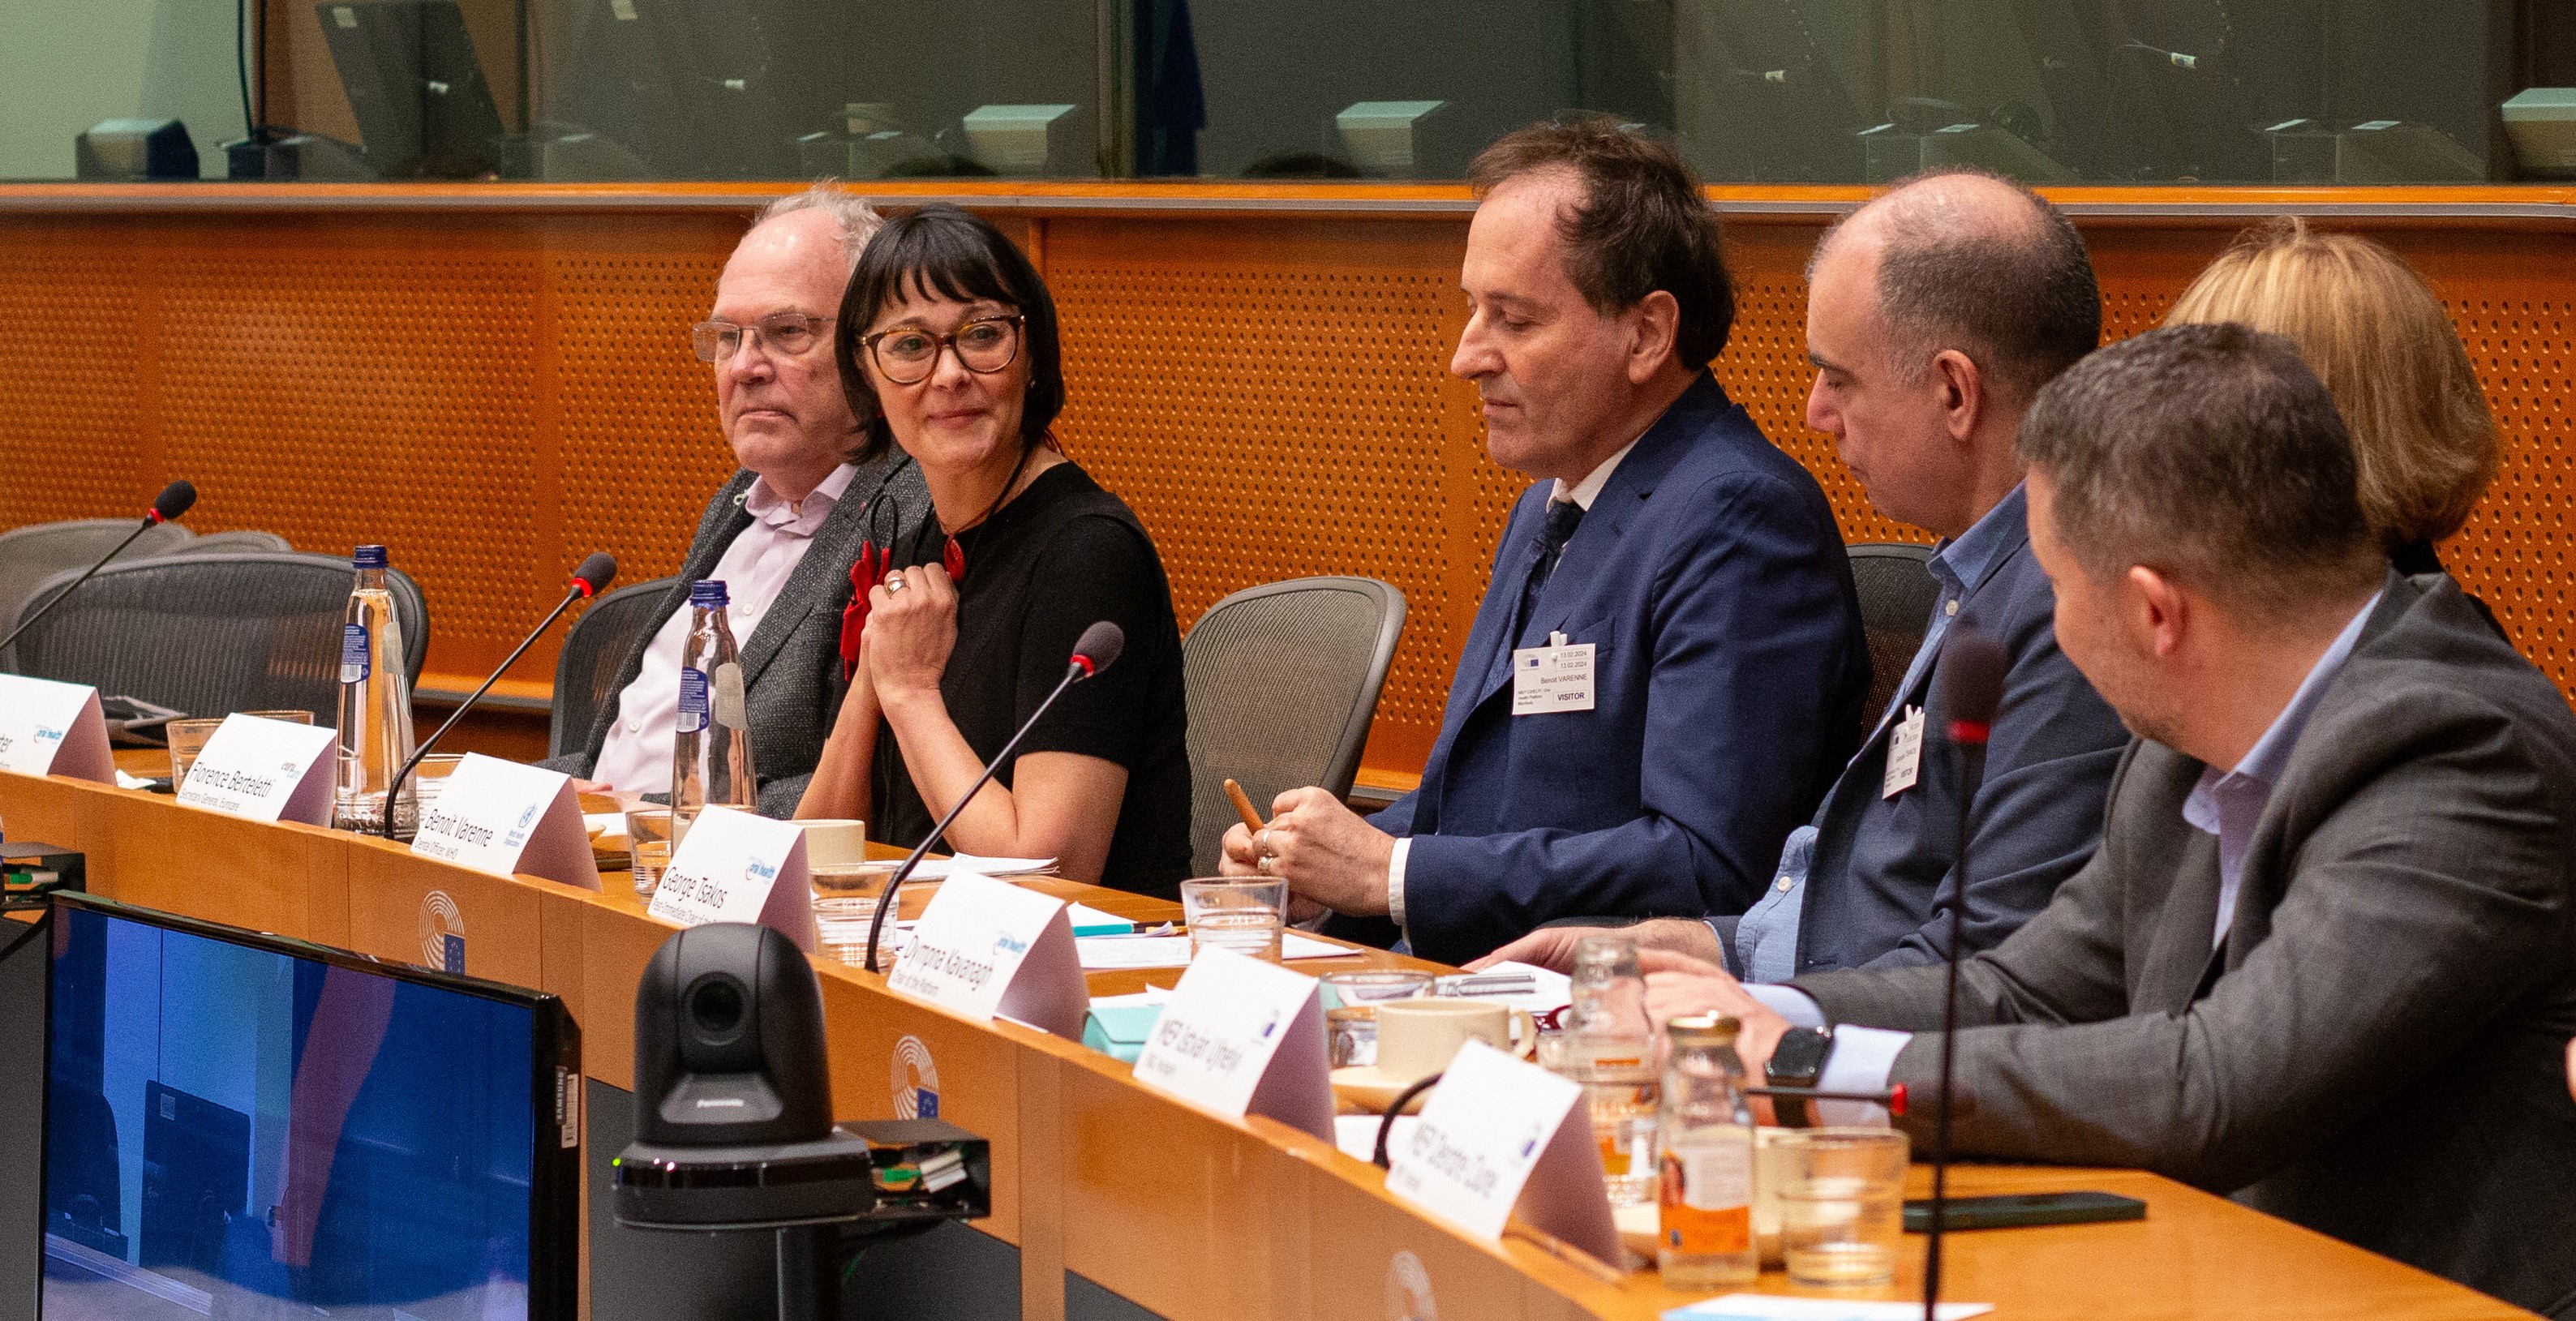 Eurocare Advocates for Evidence-Based Policies on Unhealthy Food and Drinks at European Parliament event